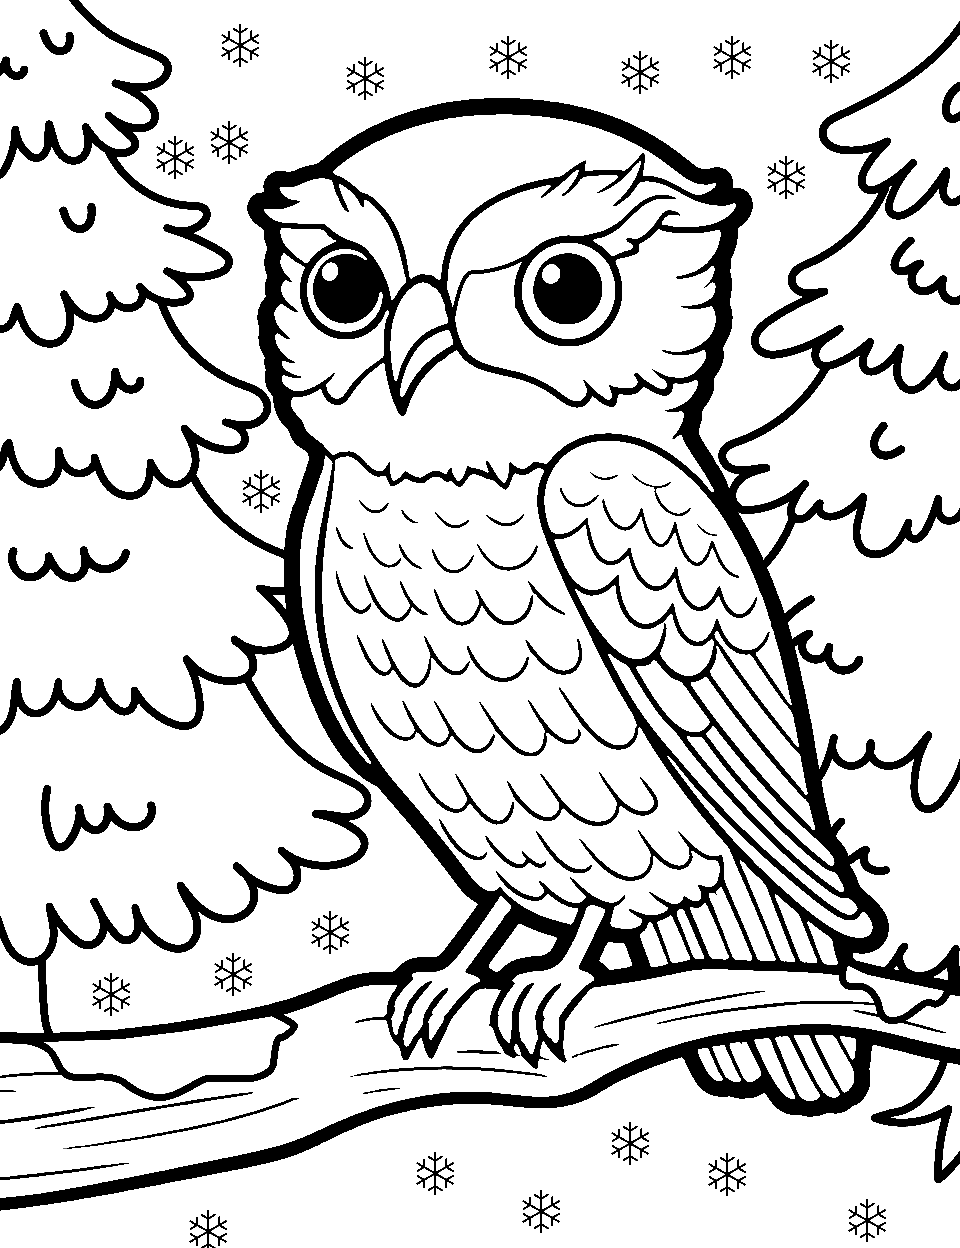 Snowy Owl in Winter Coloring Page - A majestic snowy owl with a snowy landscape in the background.